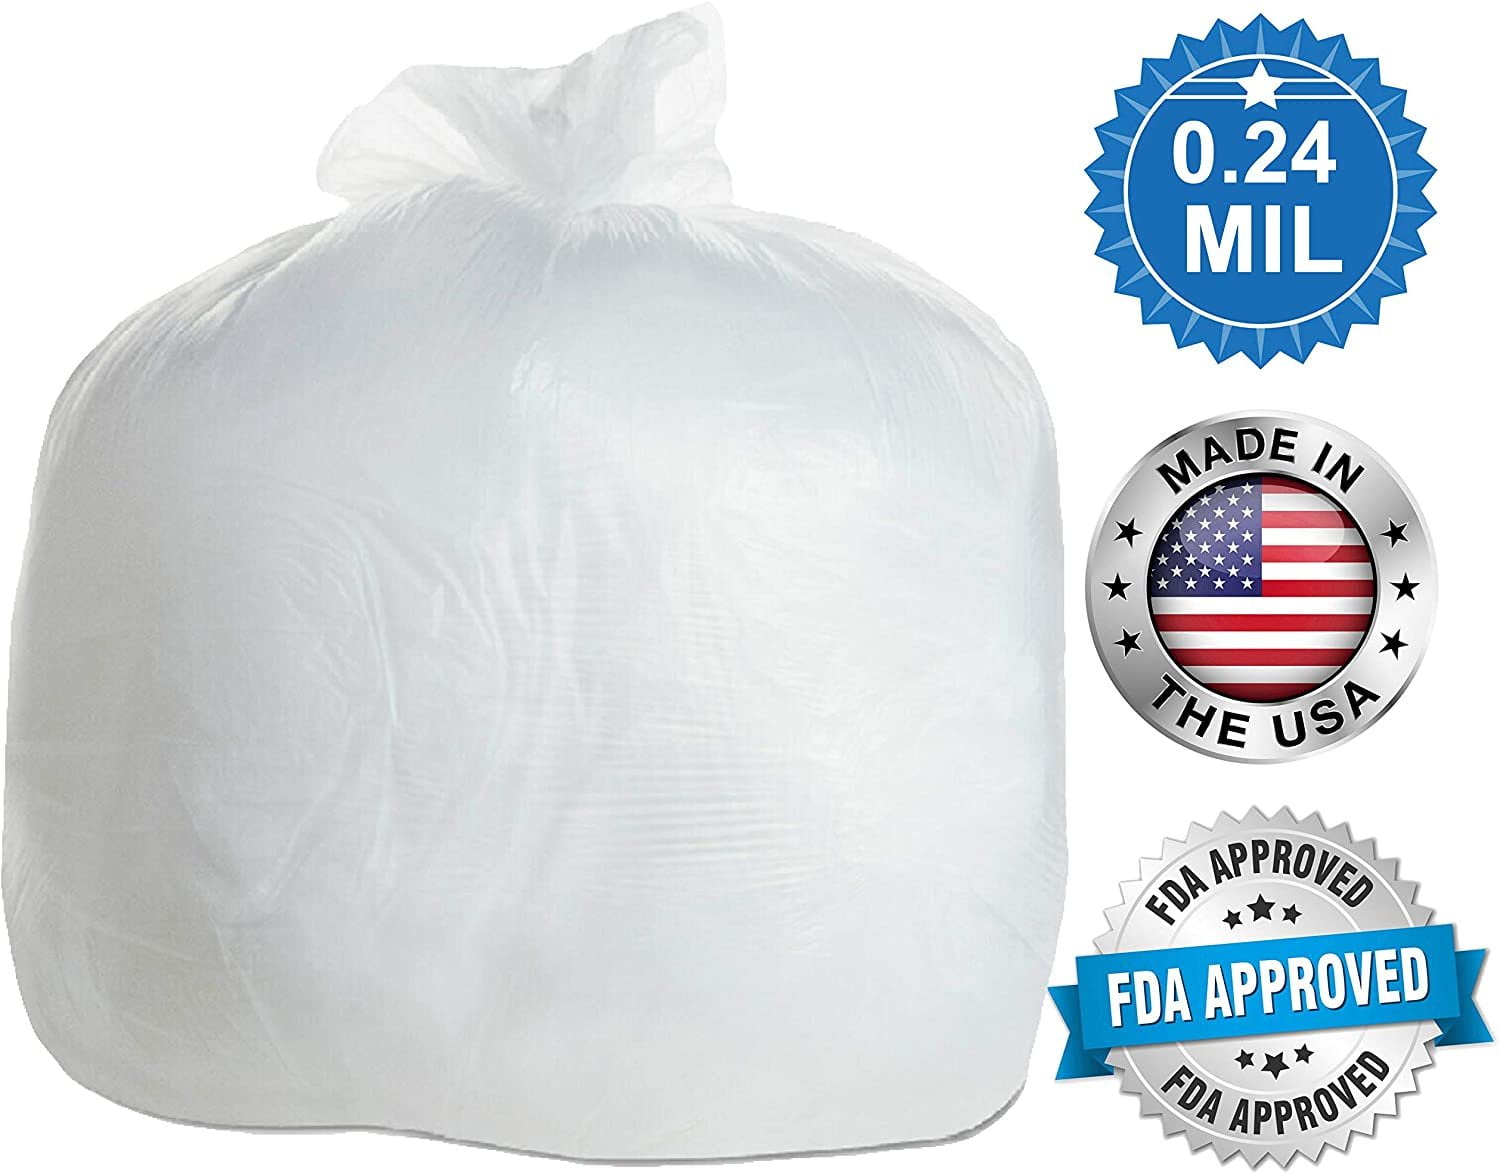 Commercial trash bags 16 gallon 24x33 .6 mil case of 500